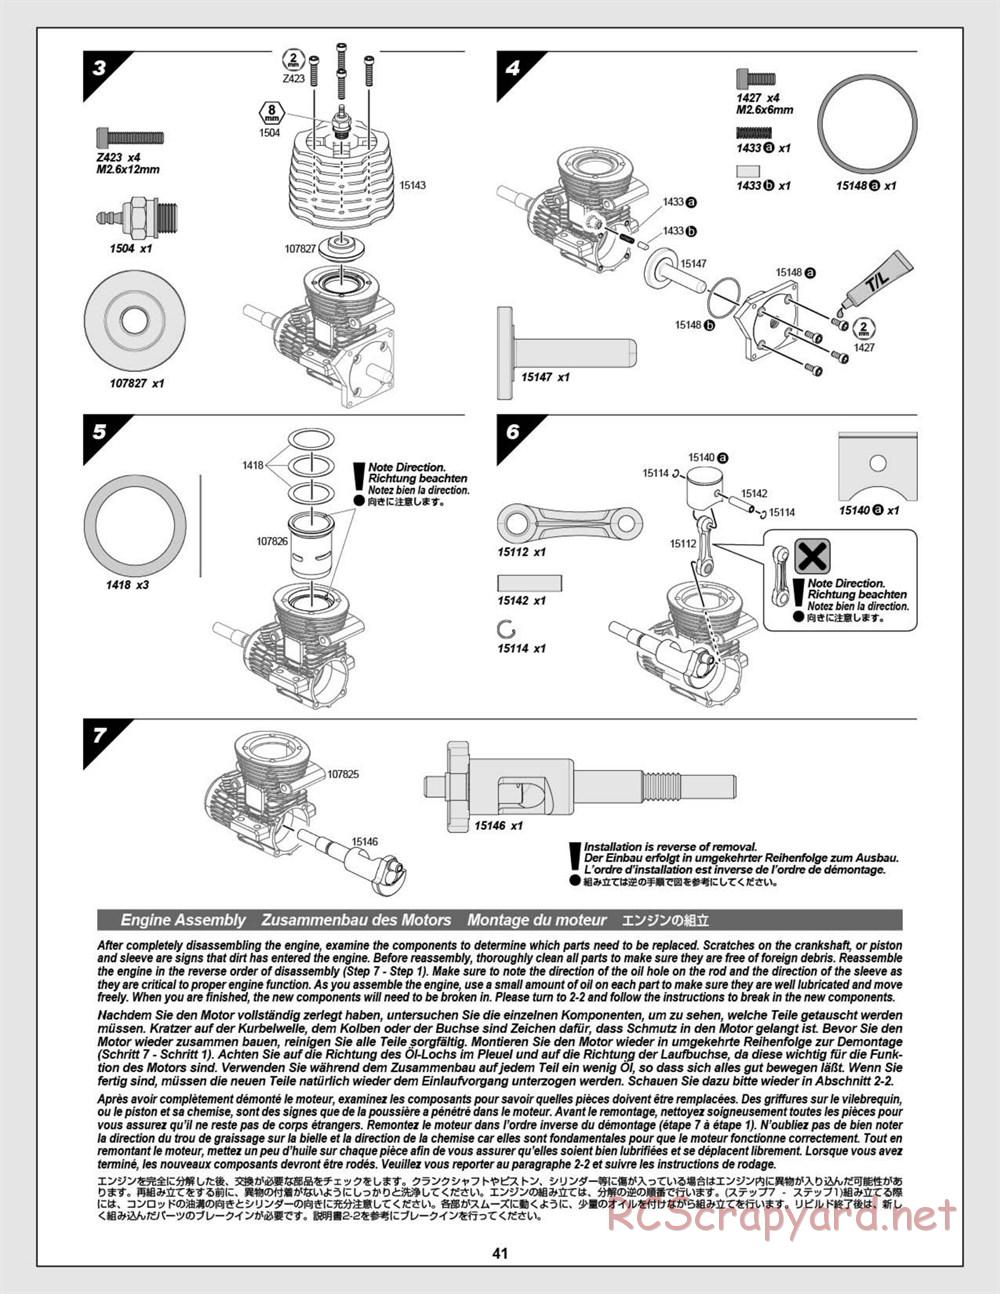 HPI - WR8 3.0 - Manual - Page 41